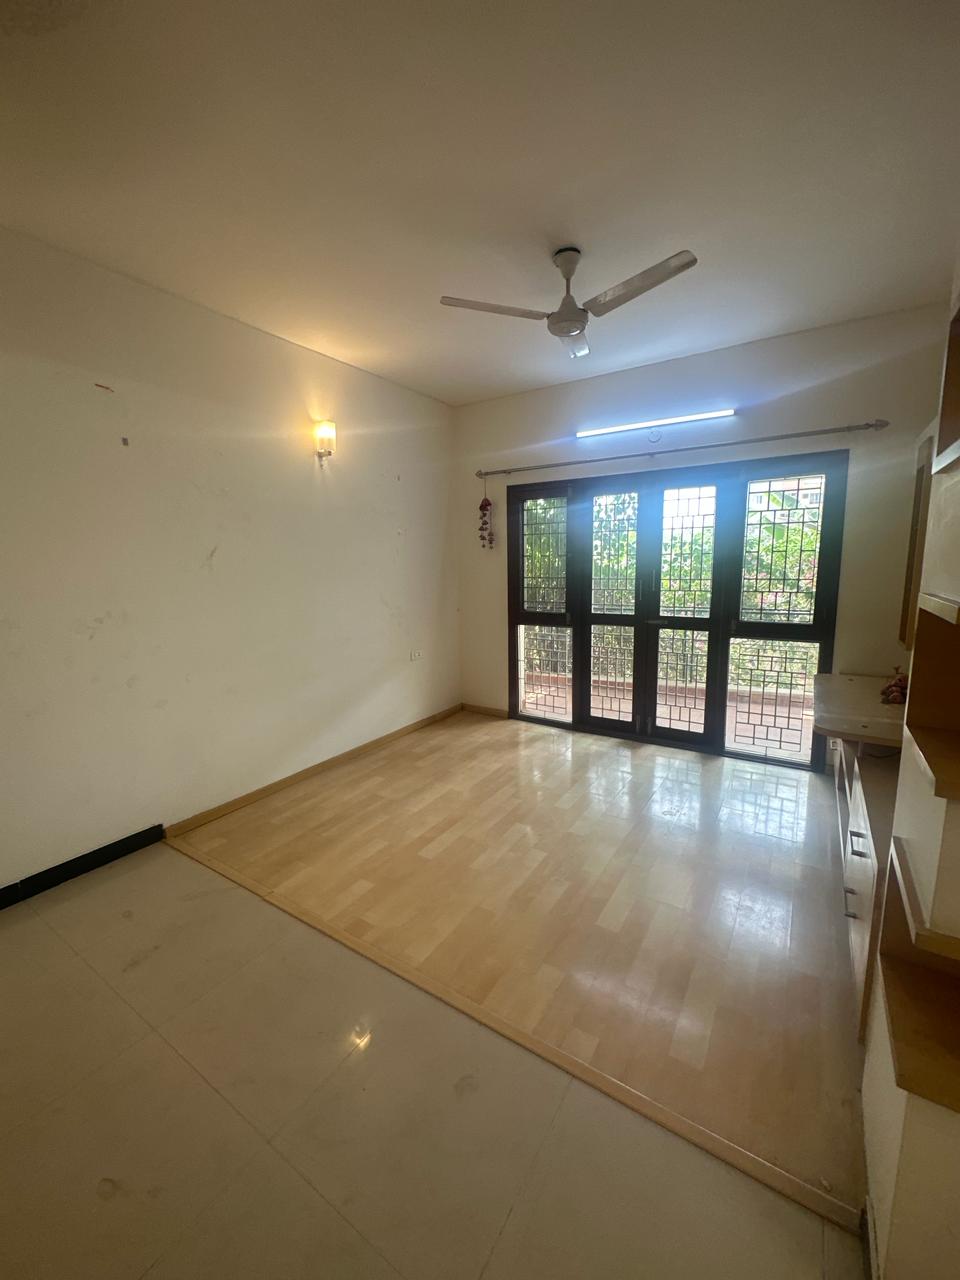 3 BHK Independent House for Lease Only at JAML2 - 4047 in Marathahalli